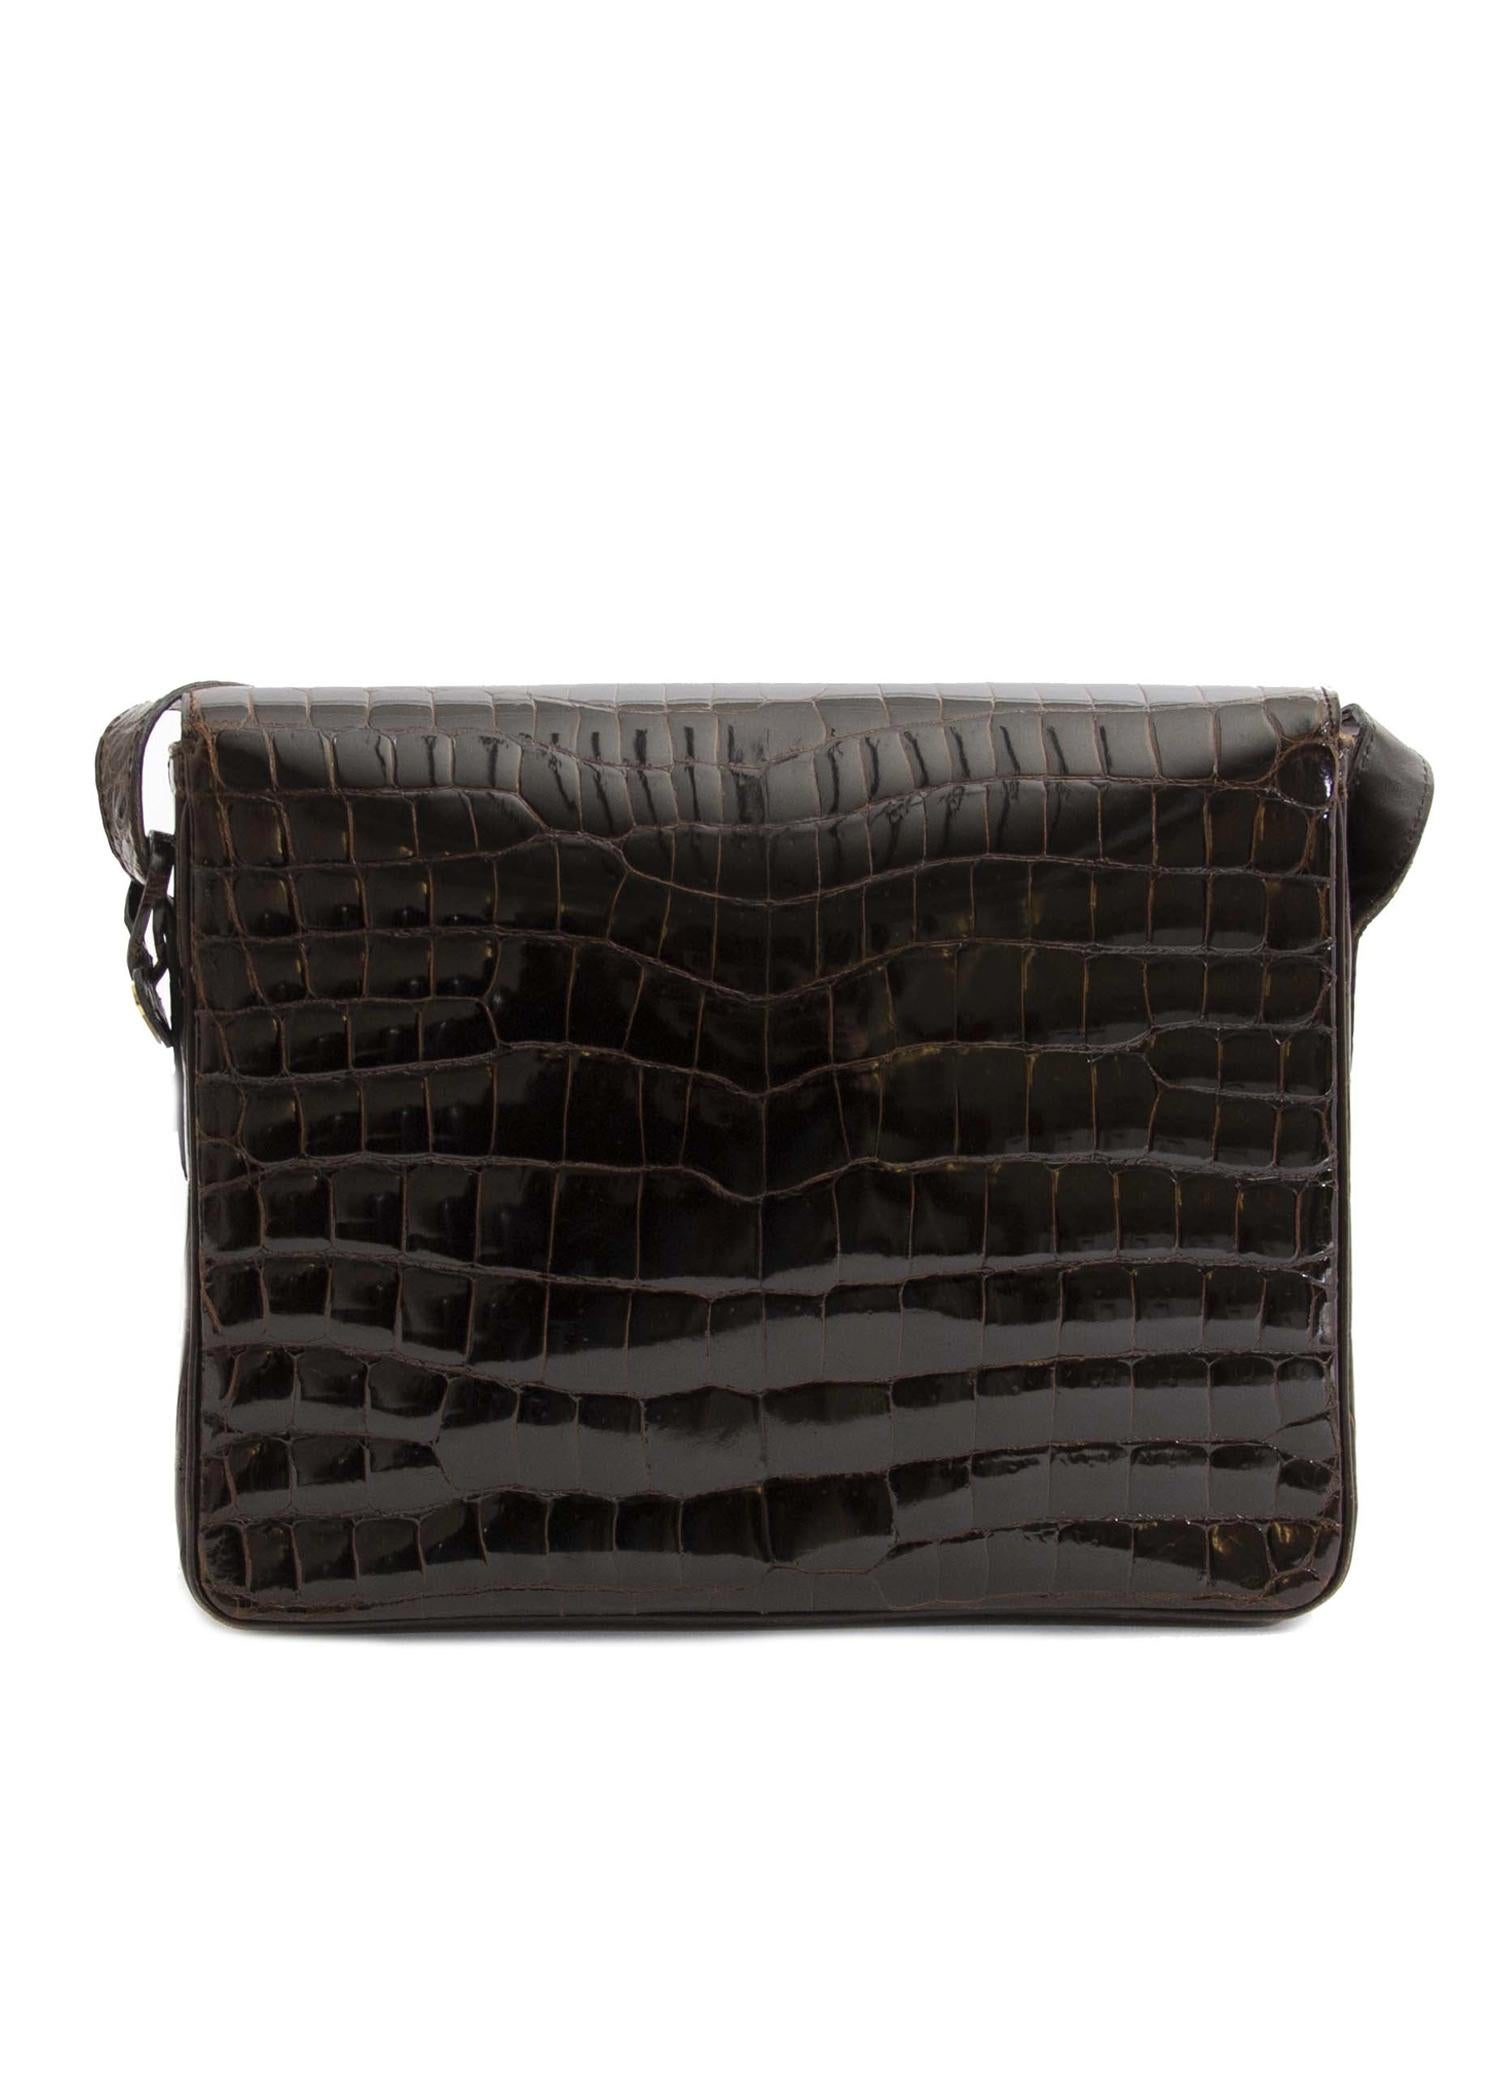 Very Good Preloved Condition

Delvaux Dark Brown Croco Passerelle Shoulder Bag

This timeless and practical Delvaux Passerelle Shoulder Bag exudes class. It's crafted from beautifull shiny croco leather and features the iconic D signature. The